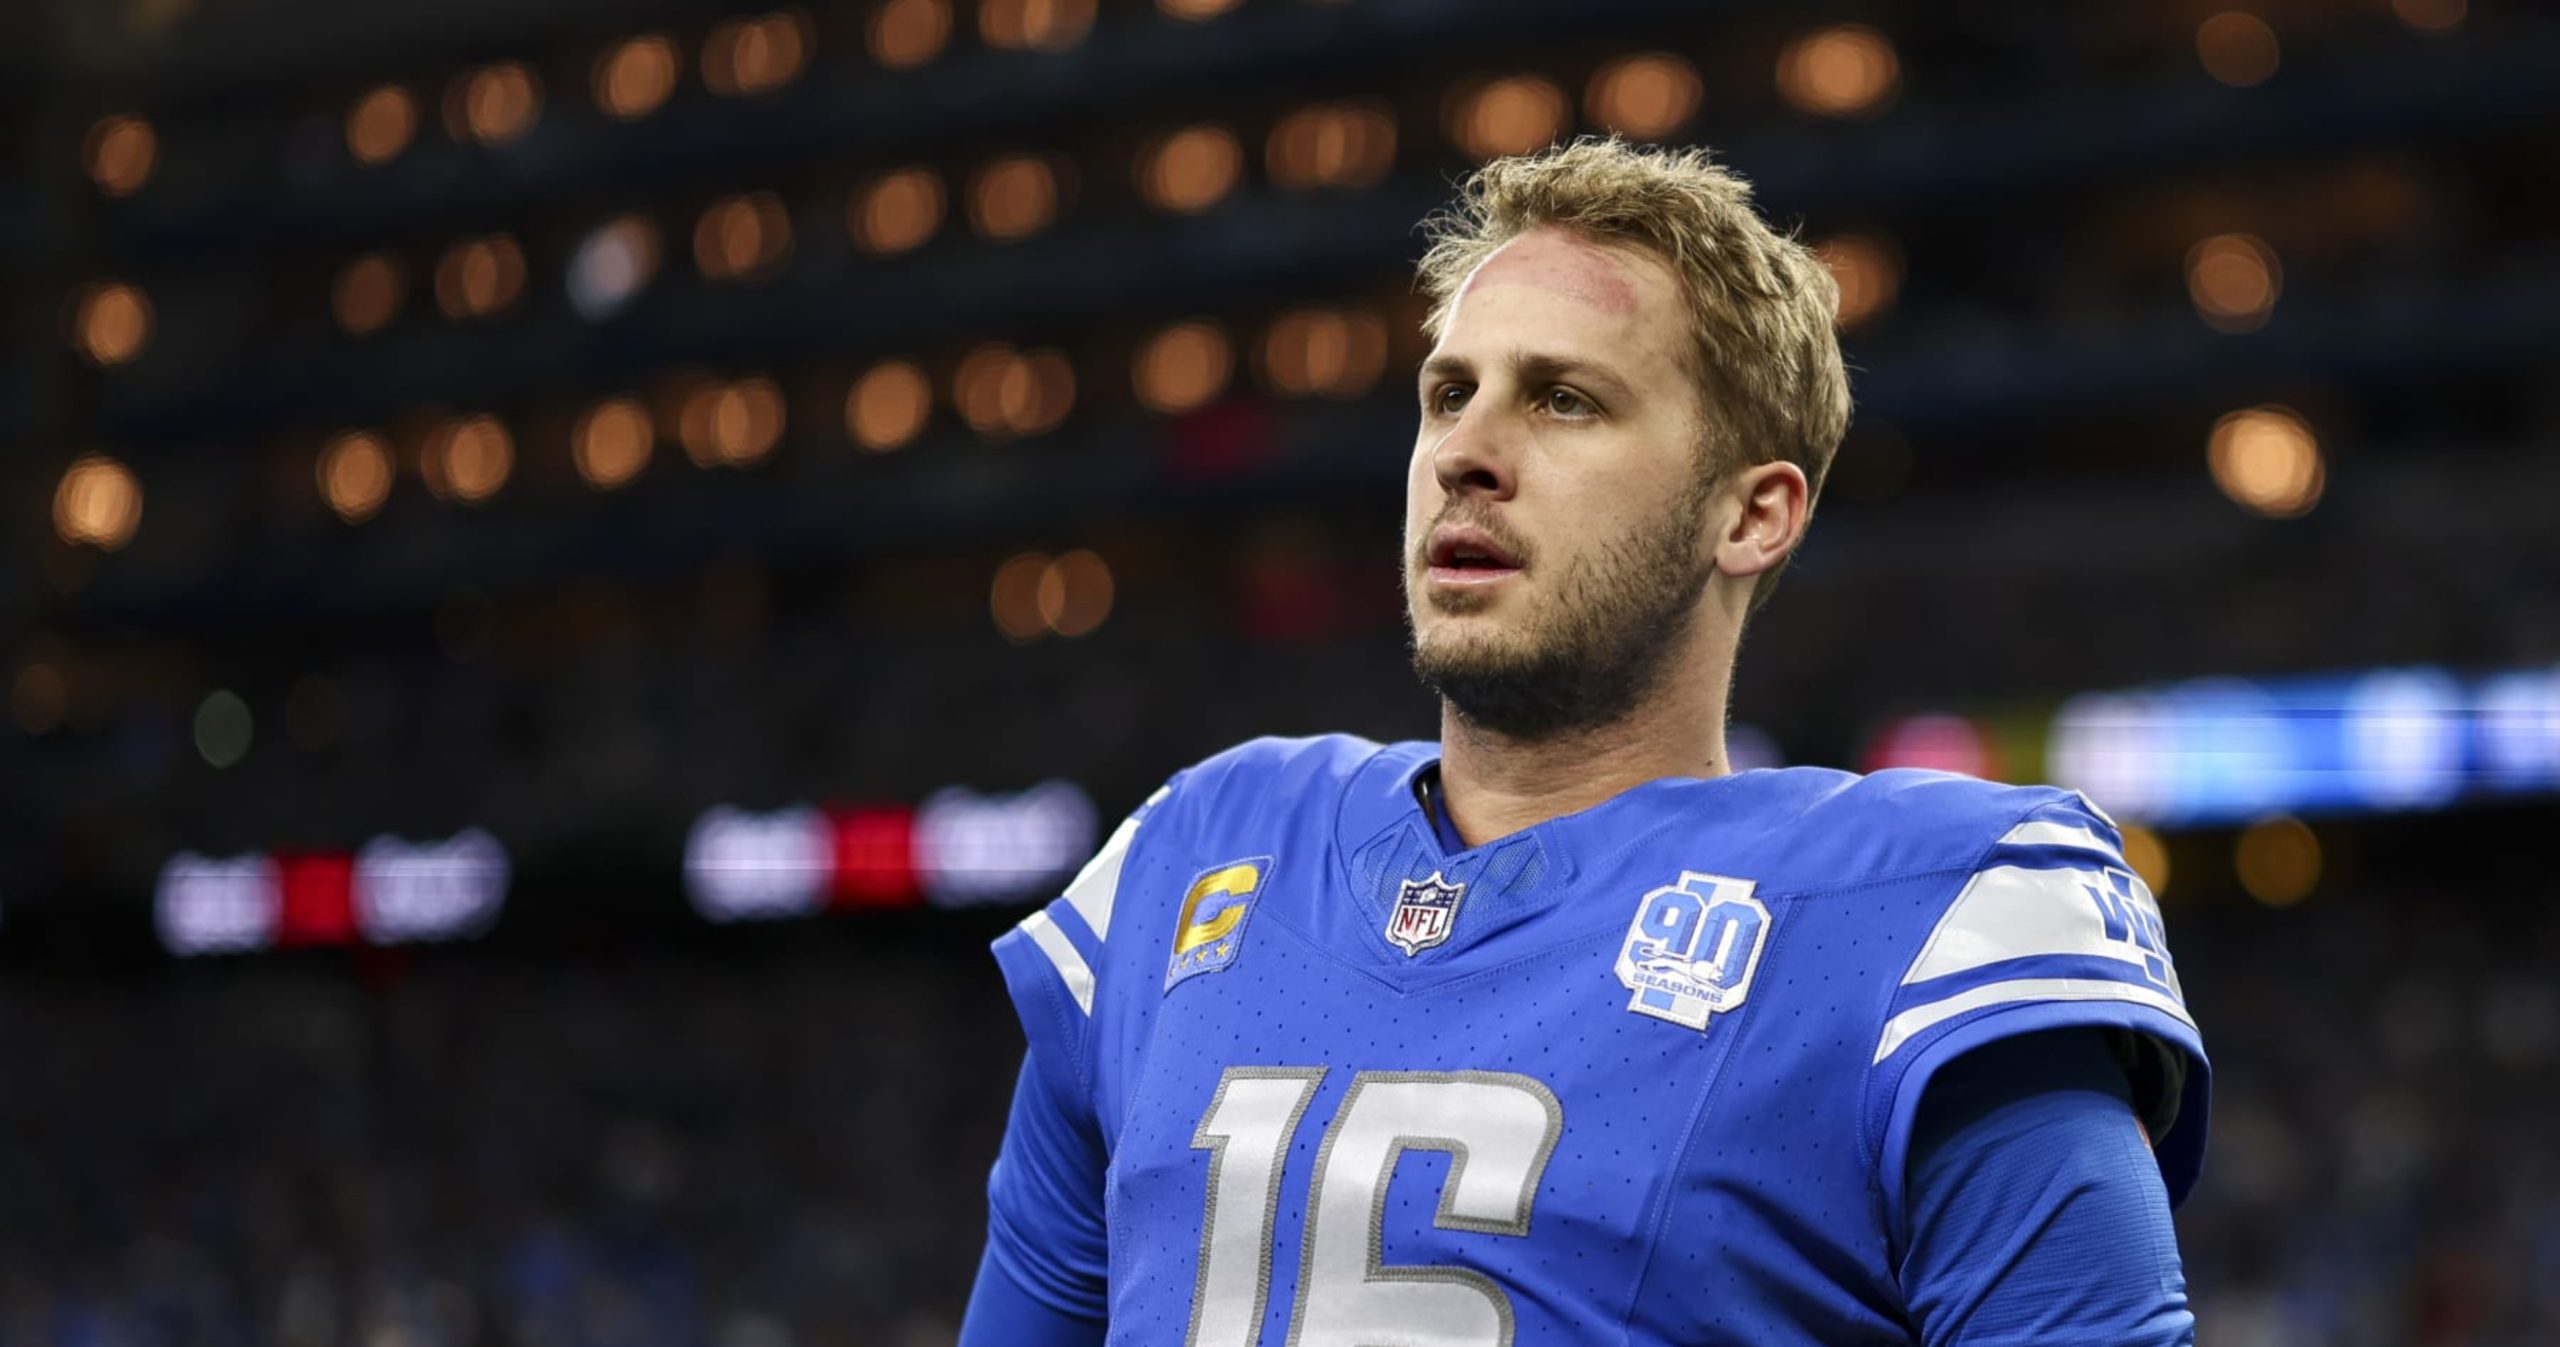 Breaking news: Detroit Lions QB Jared Goff not pleased with “crazy” wedding allegations as he….